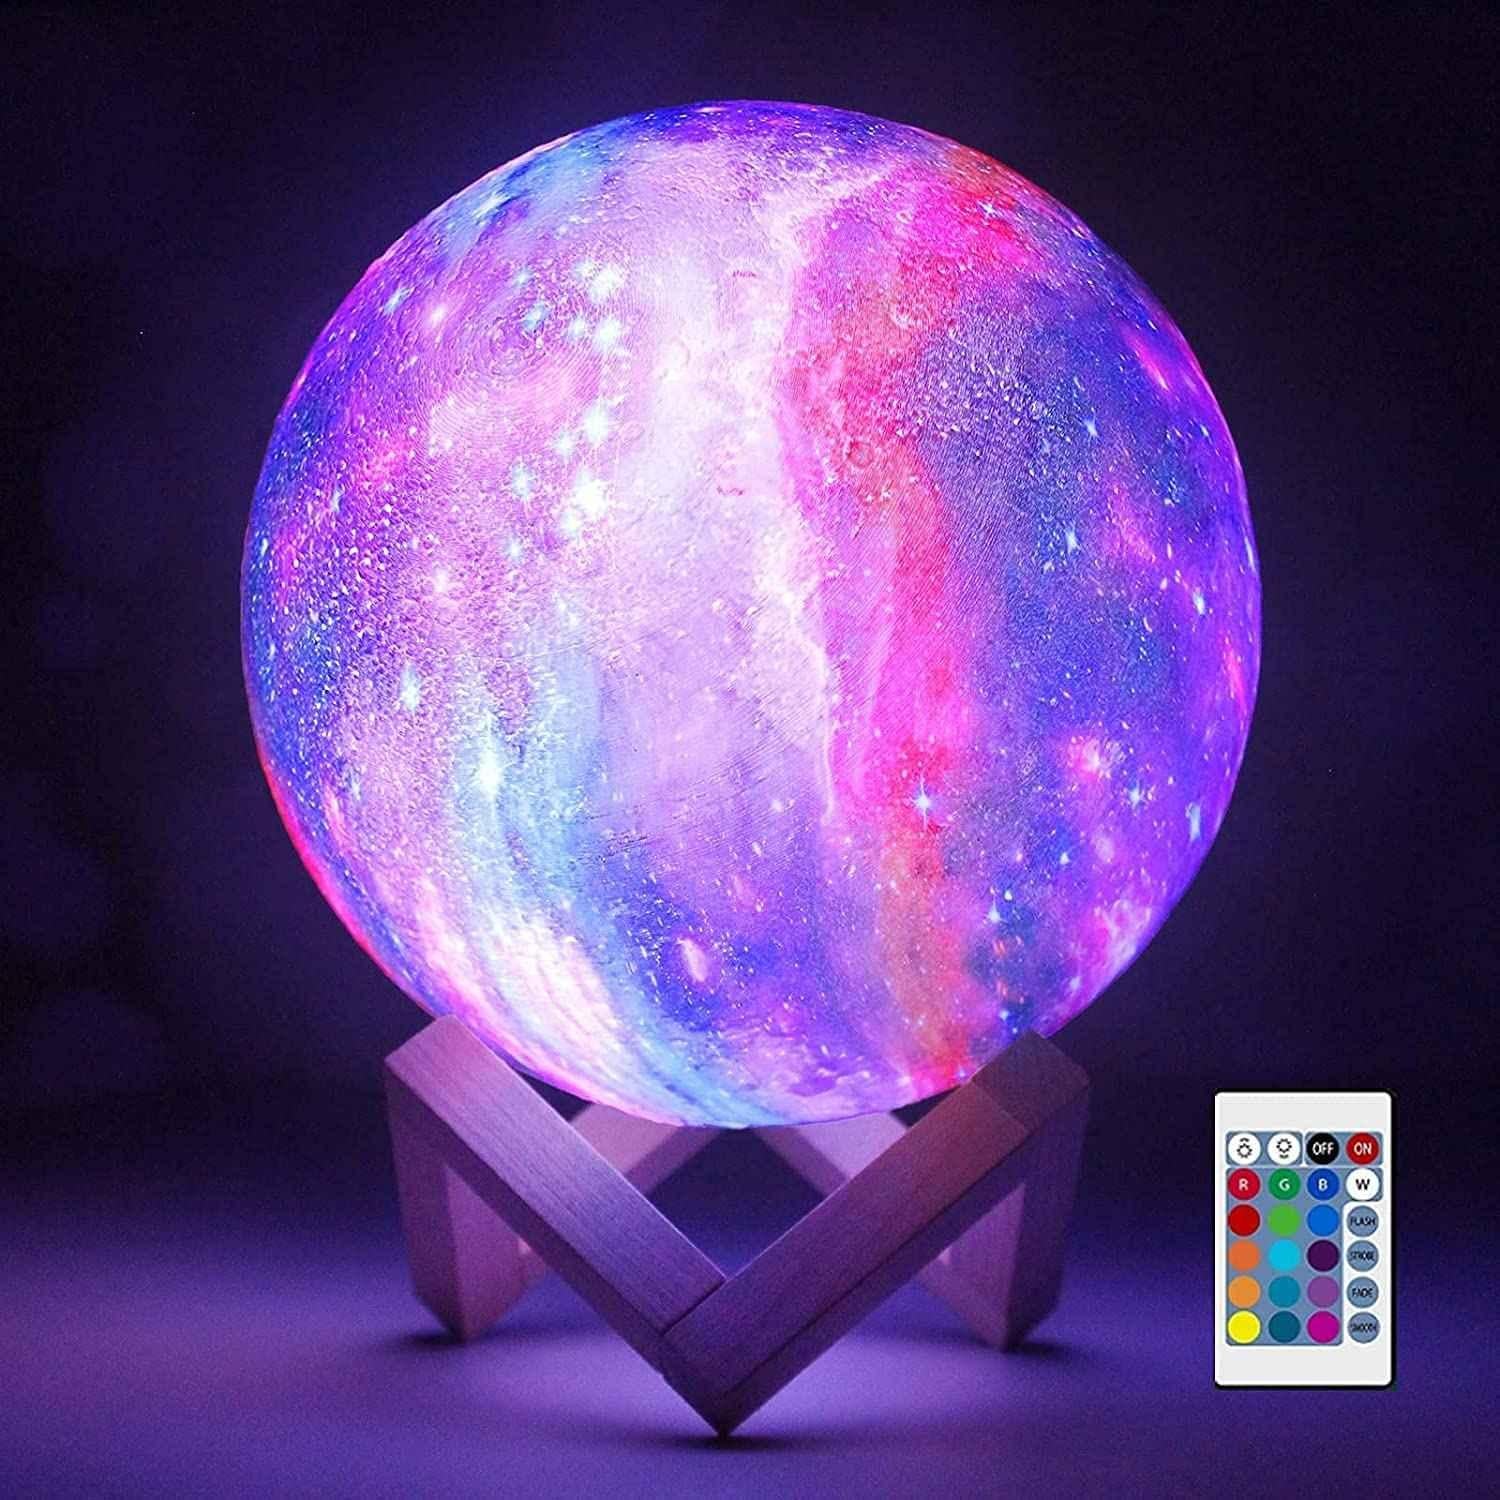 LED　Gesto　Rechargeable　16　Galaxy　₹999　At　Lamp　Moon　15cm　with　Colours　Online　Light　Battery　Night　Buy　Price